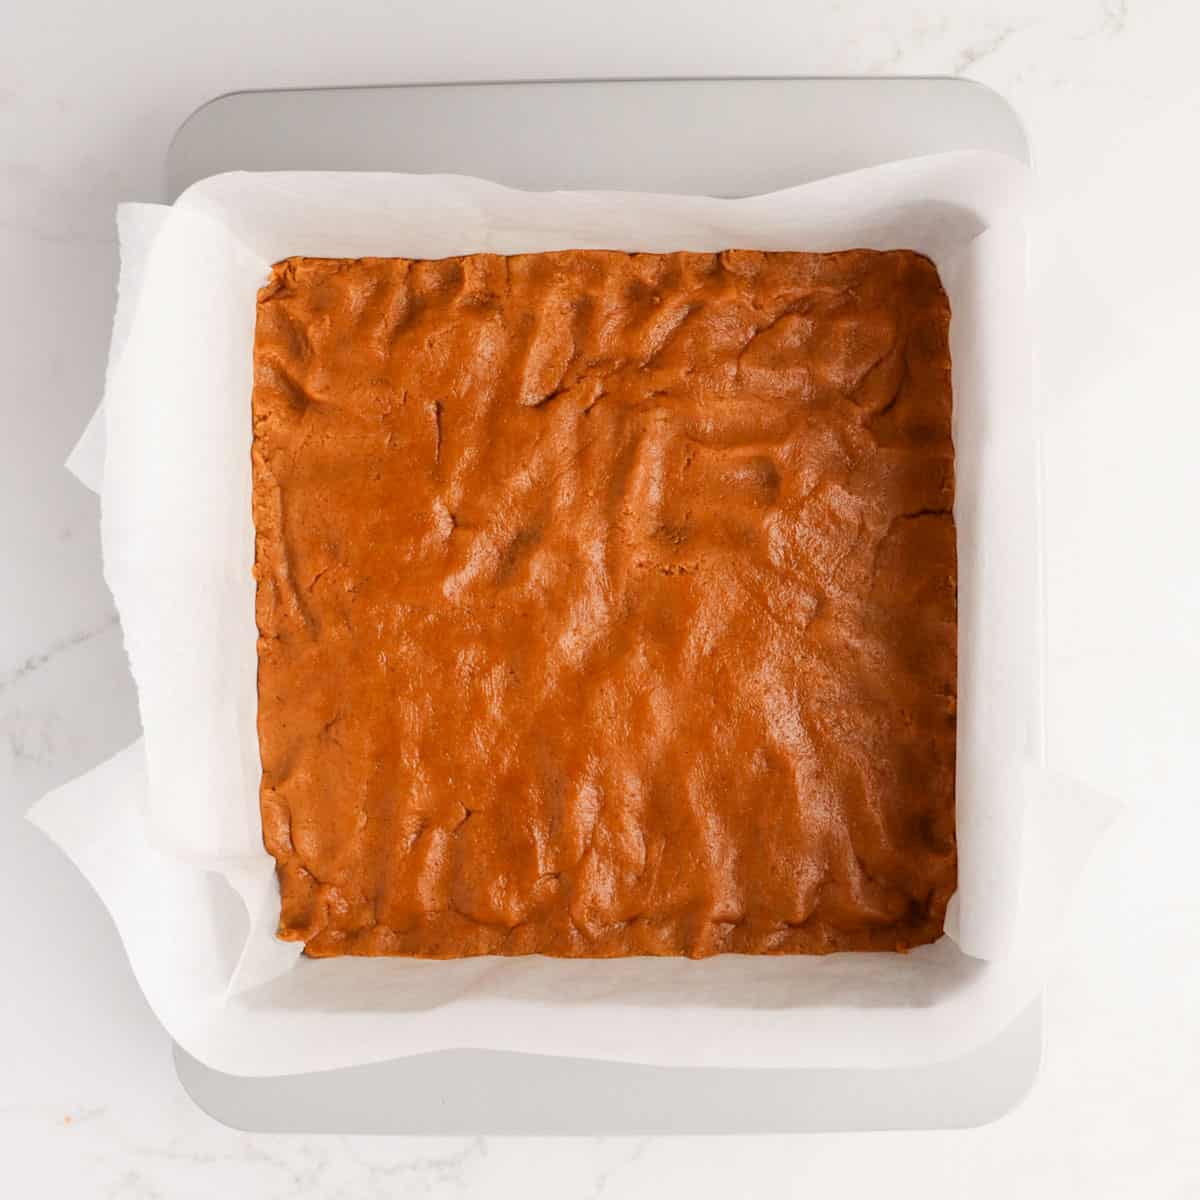 Ginger cookie bar dough pressed into a square metal pan lined with parchment paper.